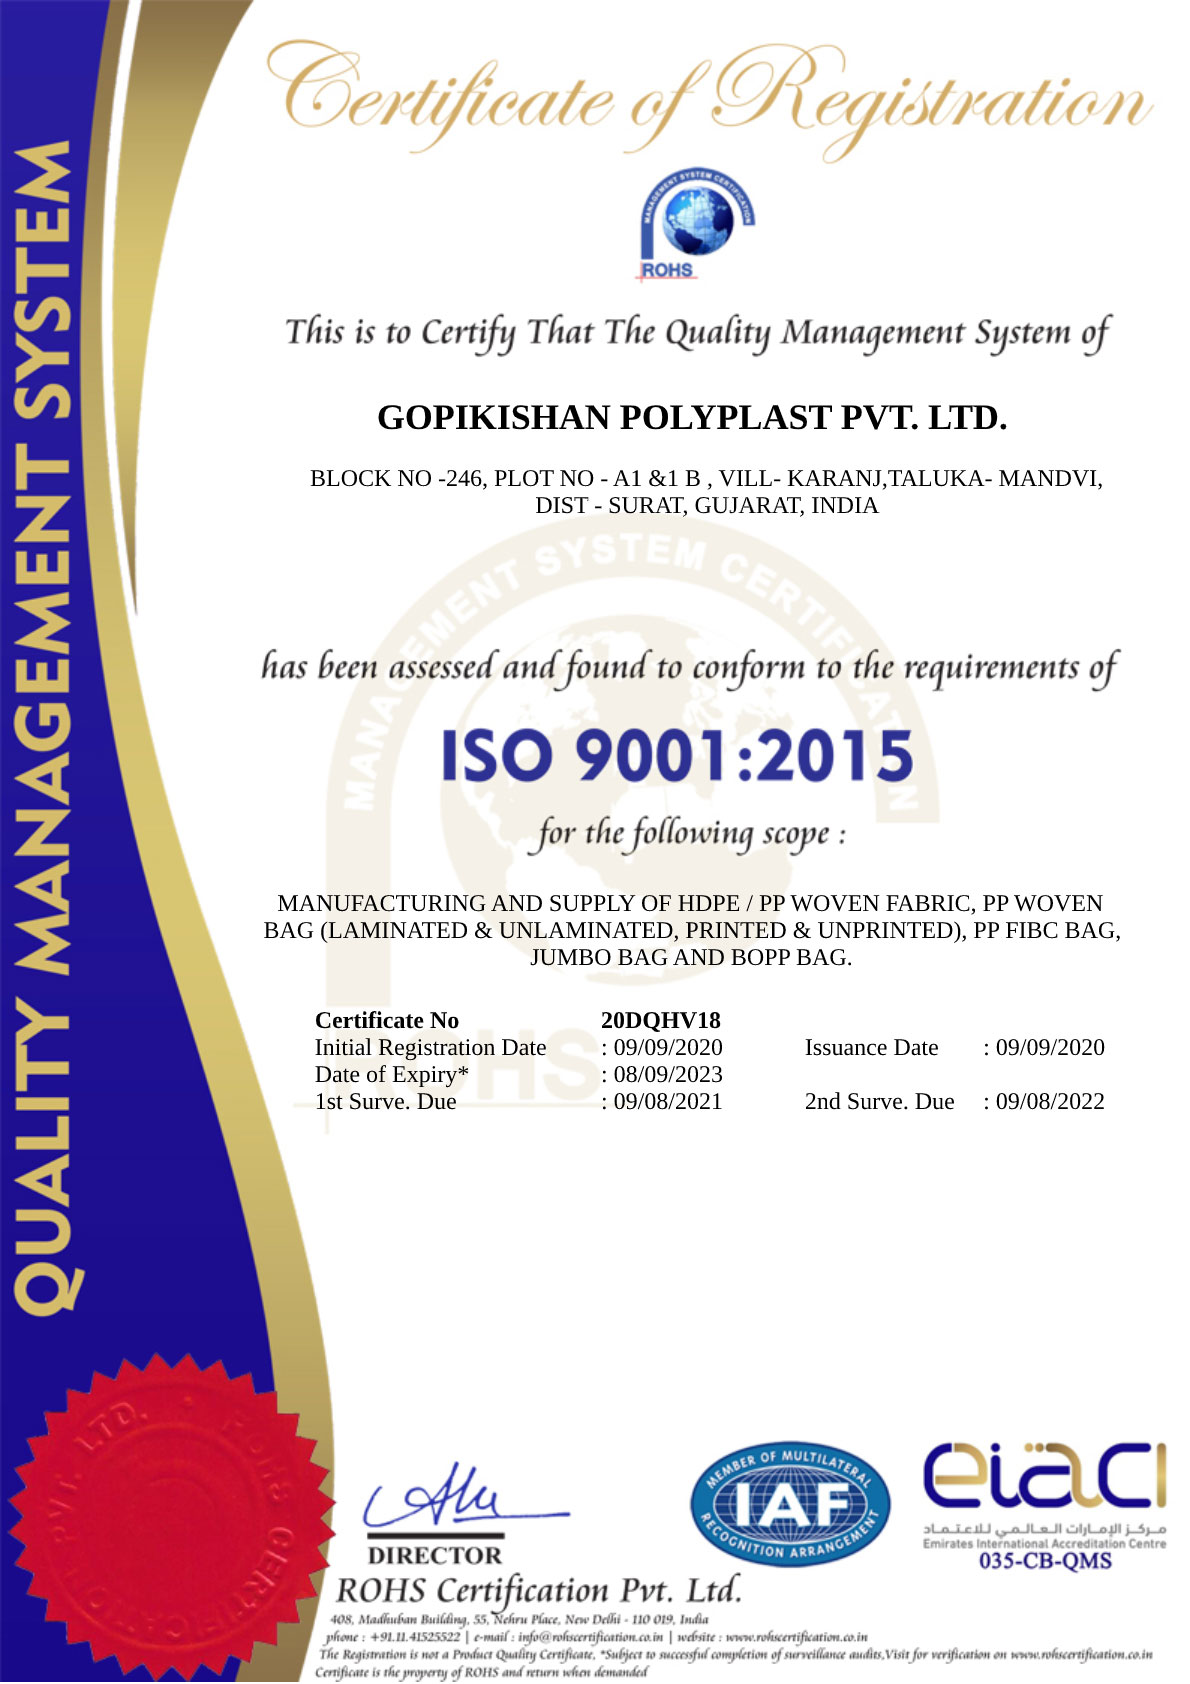 ISO 900:2015 Certification